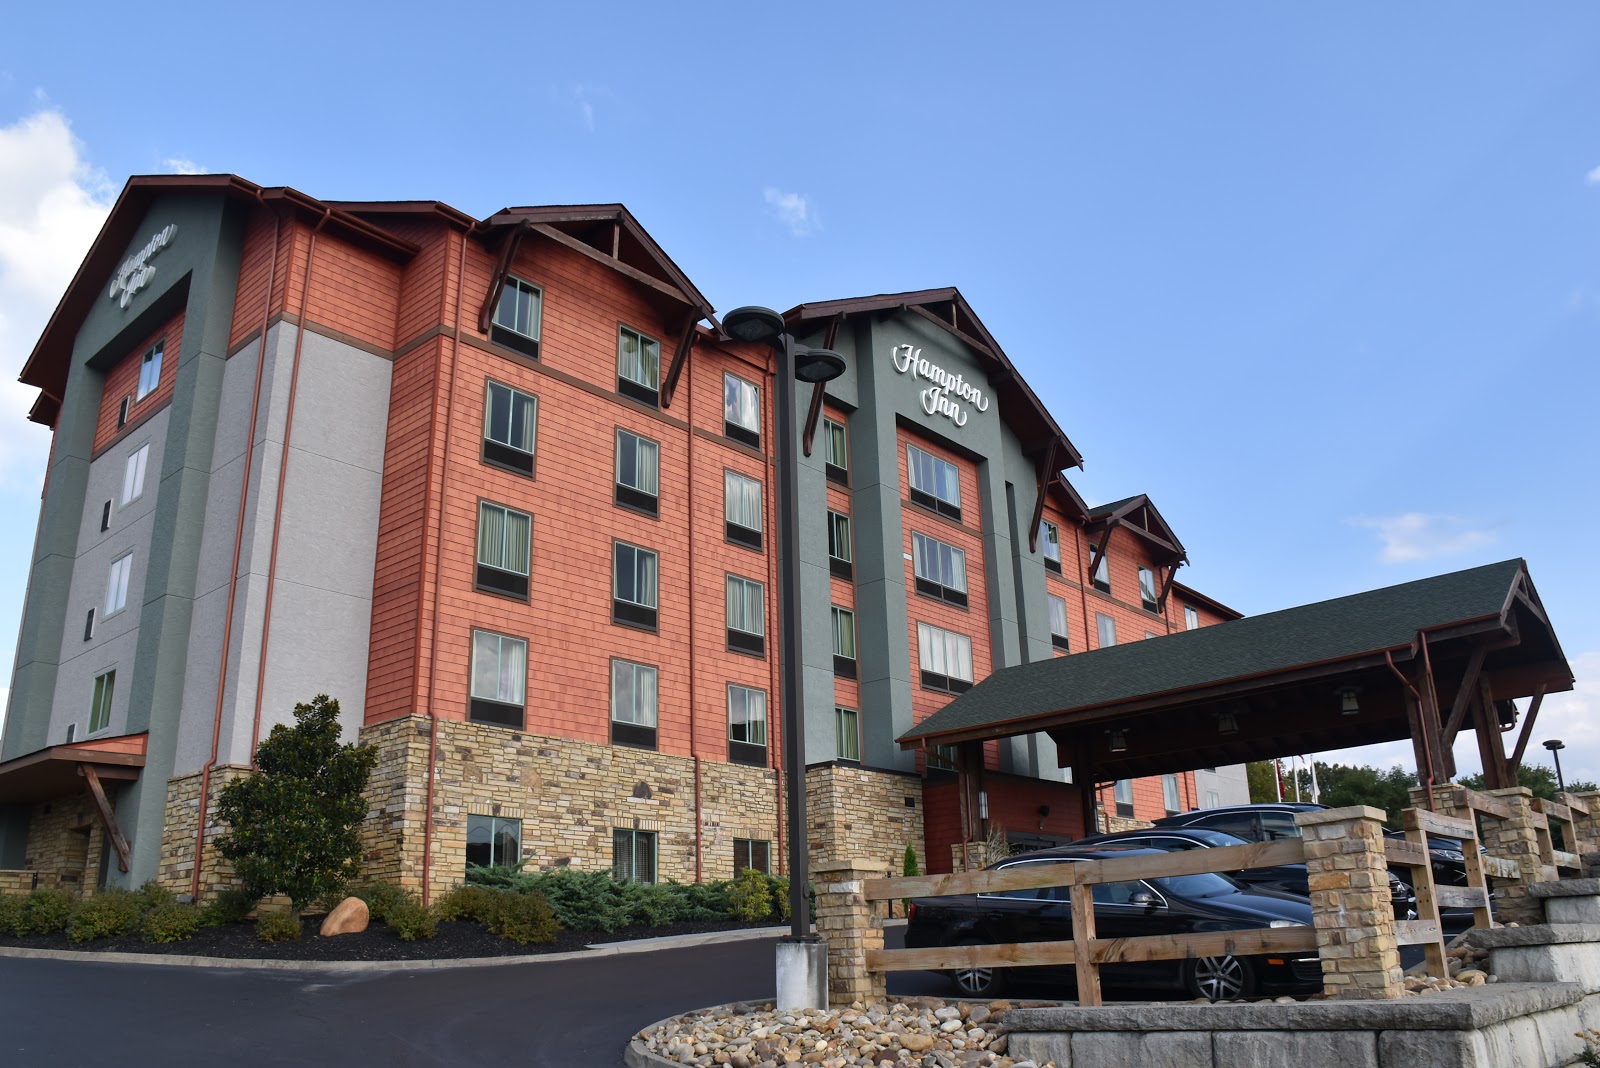 The Best Hotel for Families in Pigeon Forge: Hampton Inn by Hilton